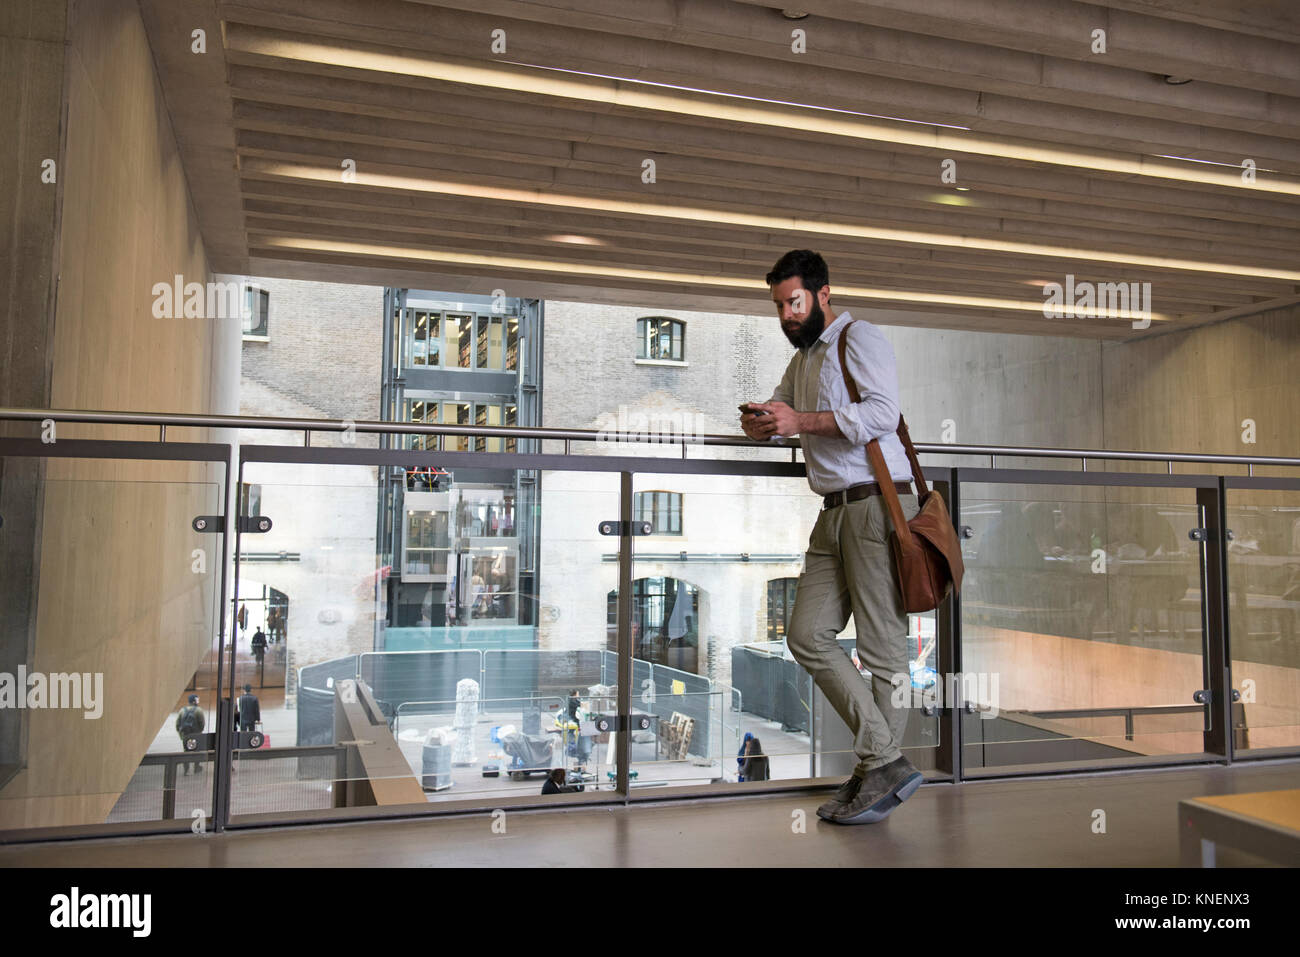 Man on mezzanine in office building texting on smartphone Stock Photo